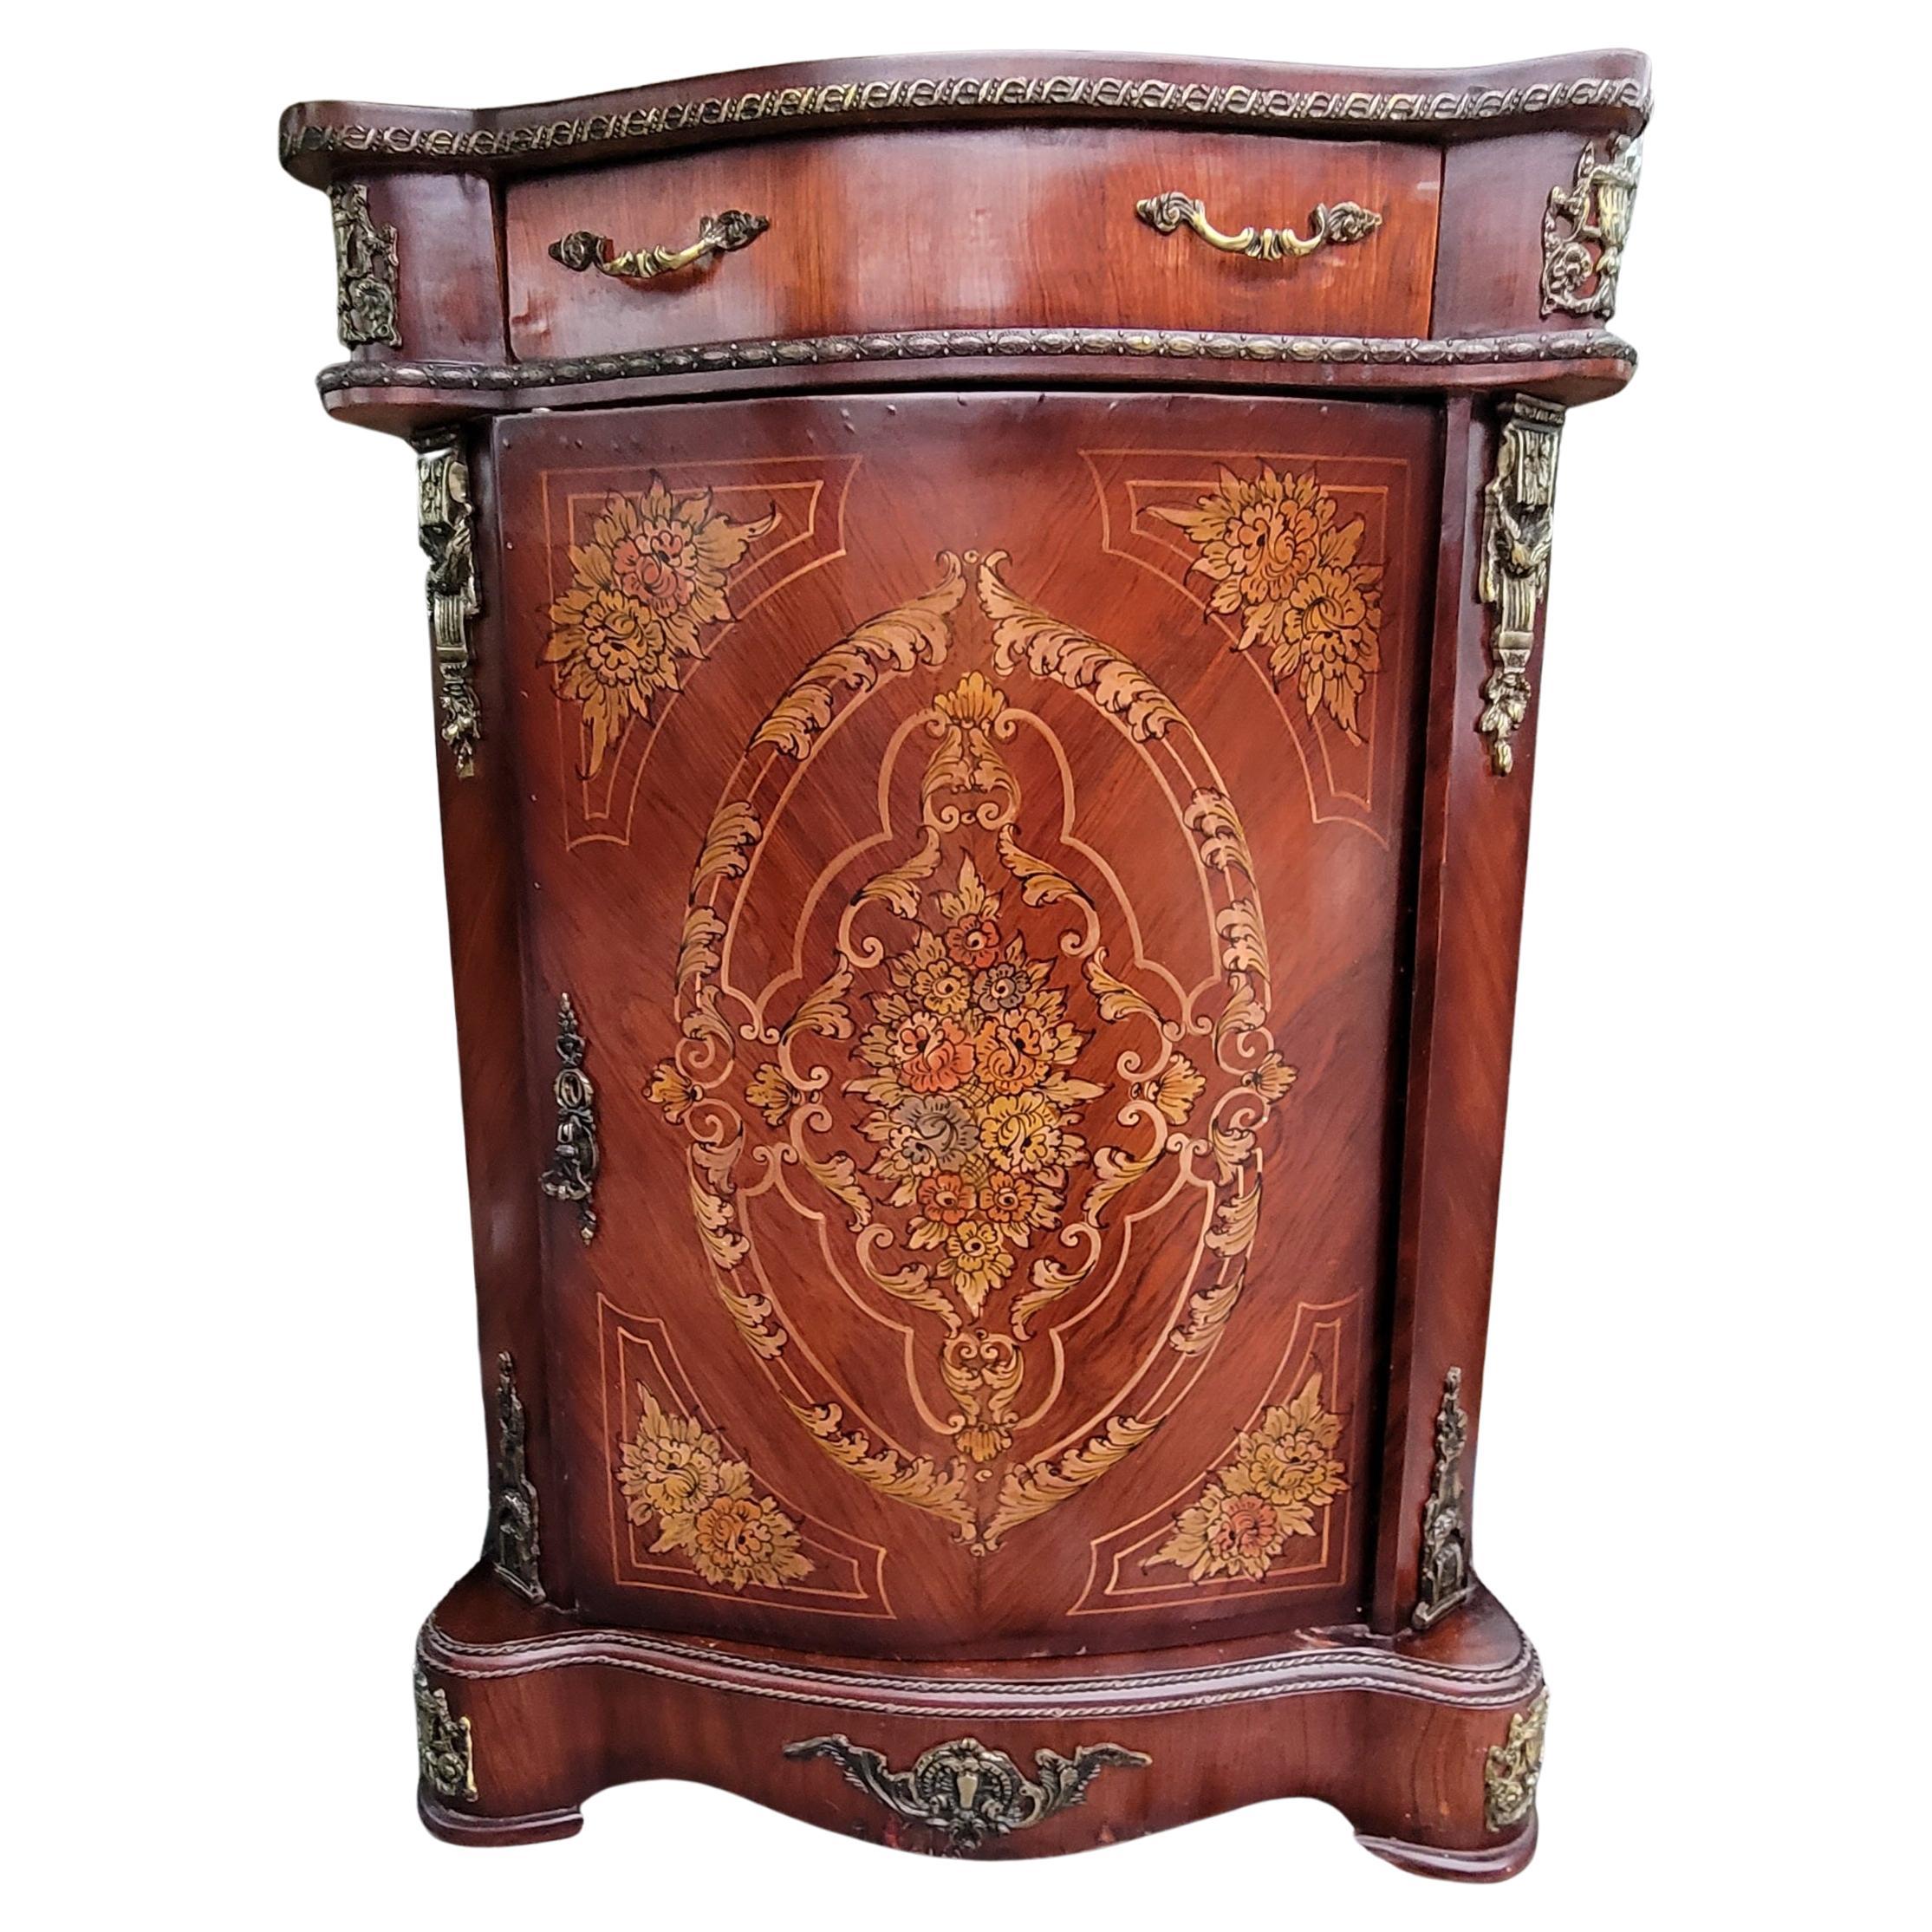 A 1940s French Continental Mahogany side console cabinet  with exquisite, finely detailed Marquetry works on the front and sides and with Metal and brass mounts and decorations throughout. Absolutely gorgeous console suited for your entry hall or